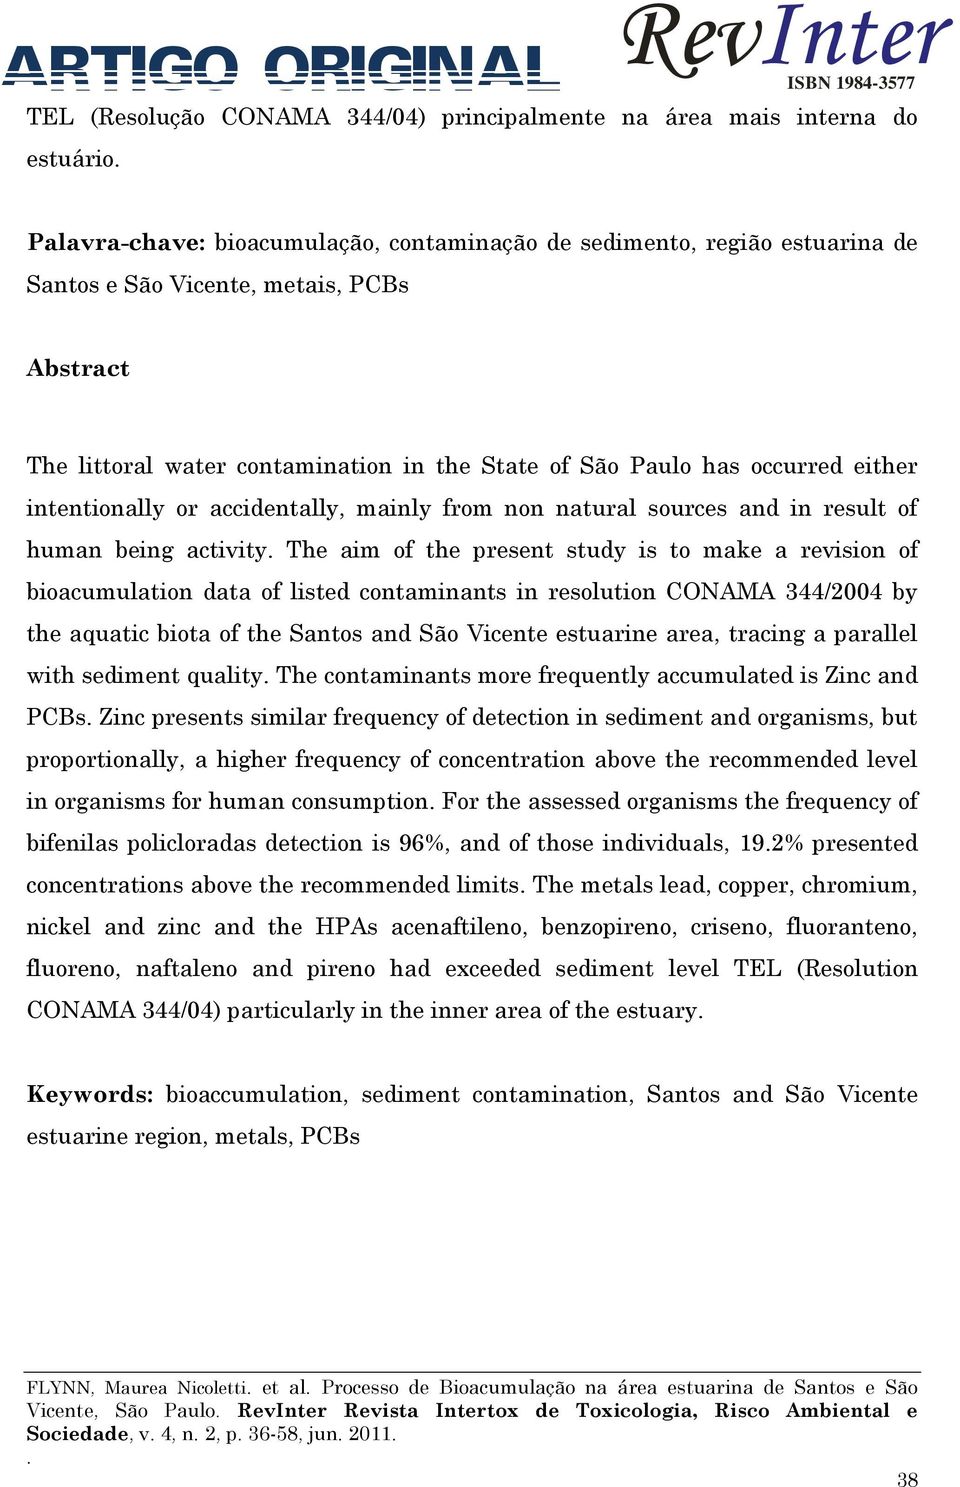 present study is to make a revision of bioacumulation data of listed contaminants in resolution CONAMA 344/2004 by the aquatic biota of the Santos and São Vicente estuarine area, tracing a parallel